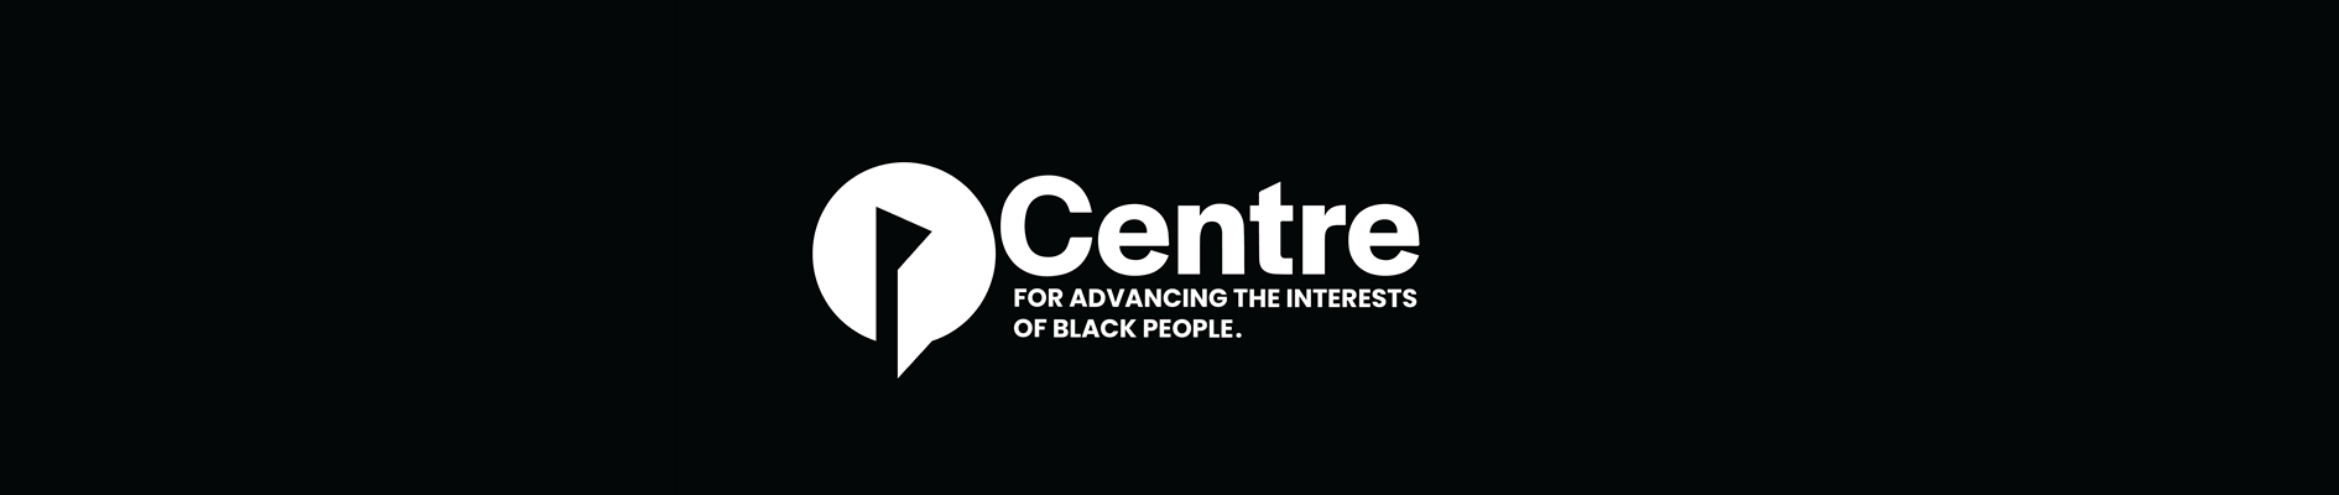 A black background with the text "Centre for Advancing the Interests of Black People" and the logo.